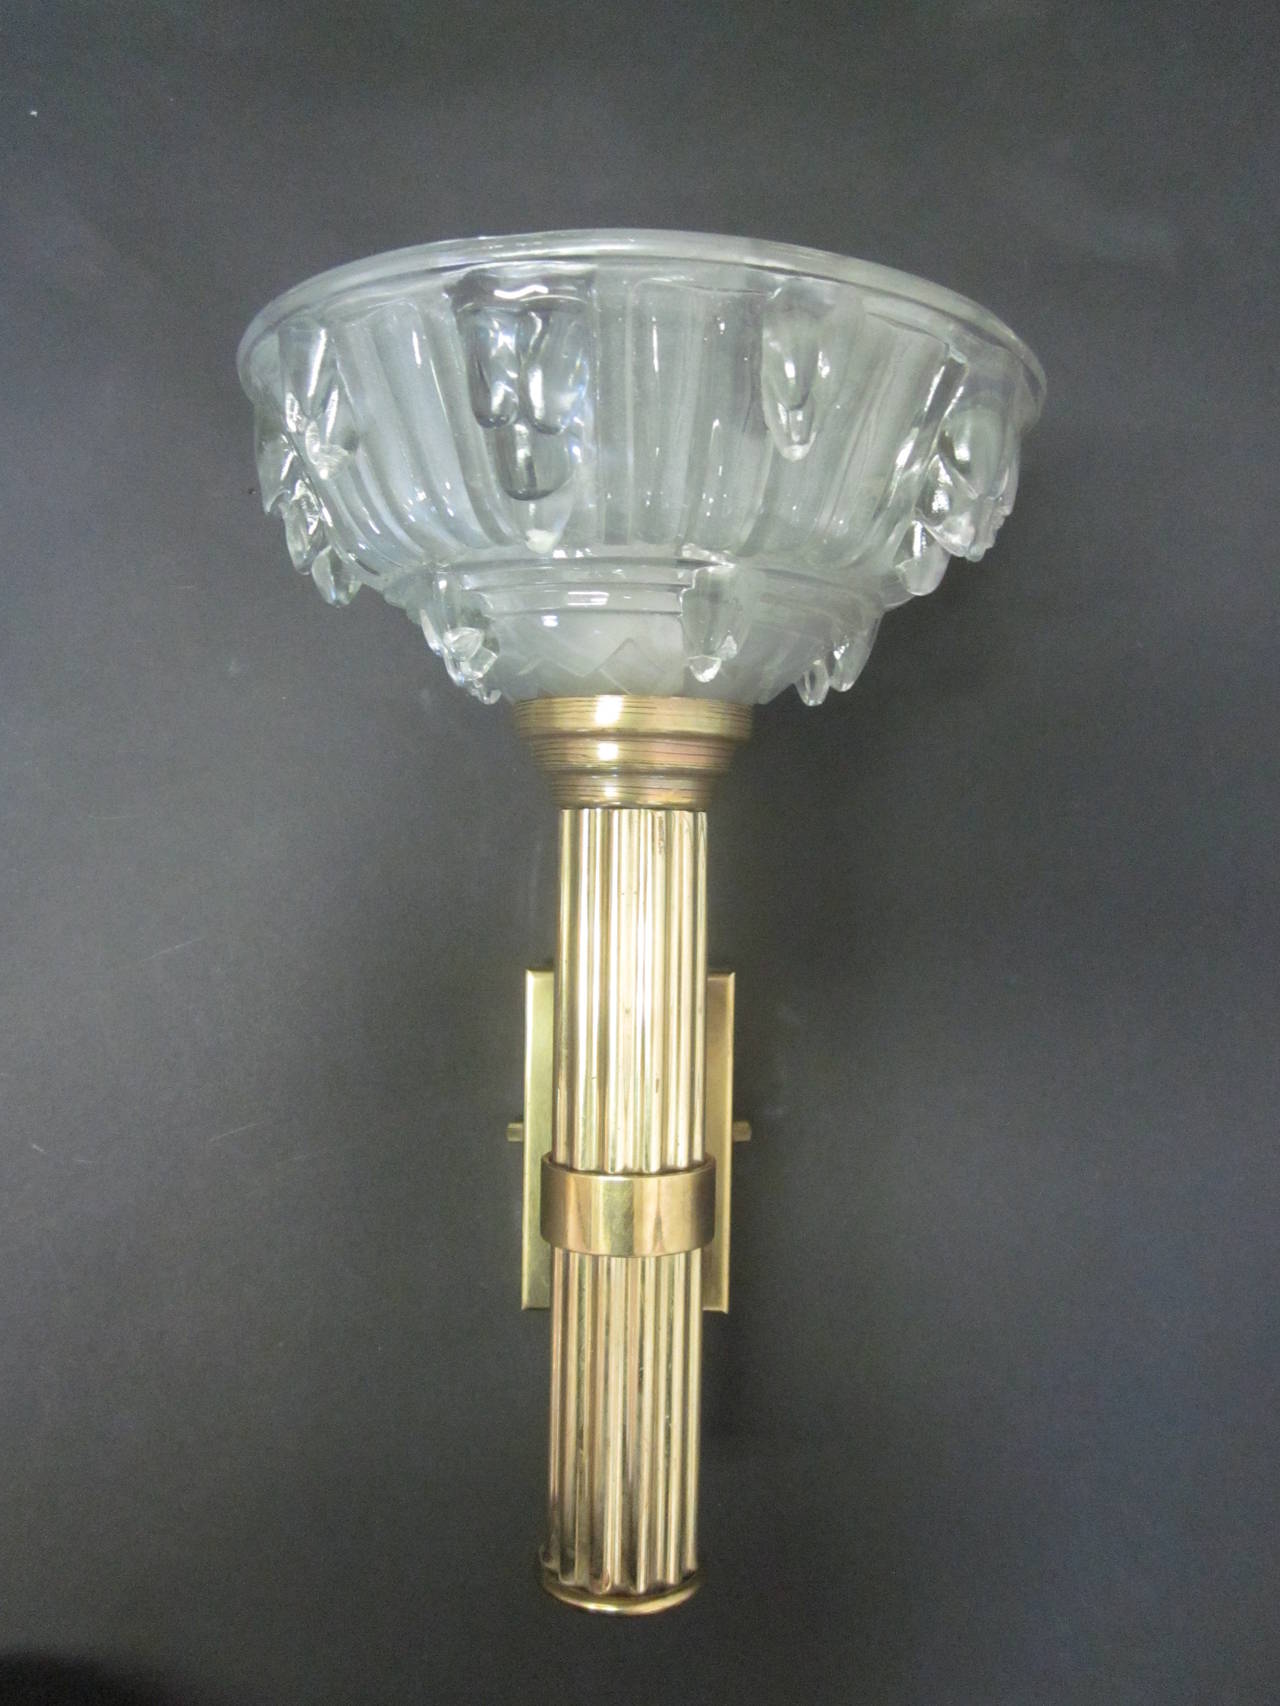 Elegant pair of French Art Deco torch sconces / wall lights with fluted stems in brass and opaline crystal glass diffusers. The glass design and methods are typical of the work of René Lalique. Sold and priced by the pair.